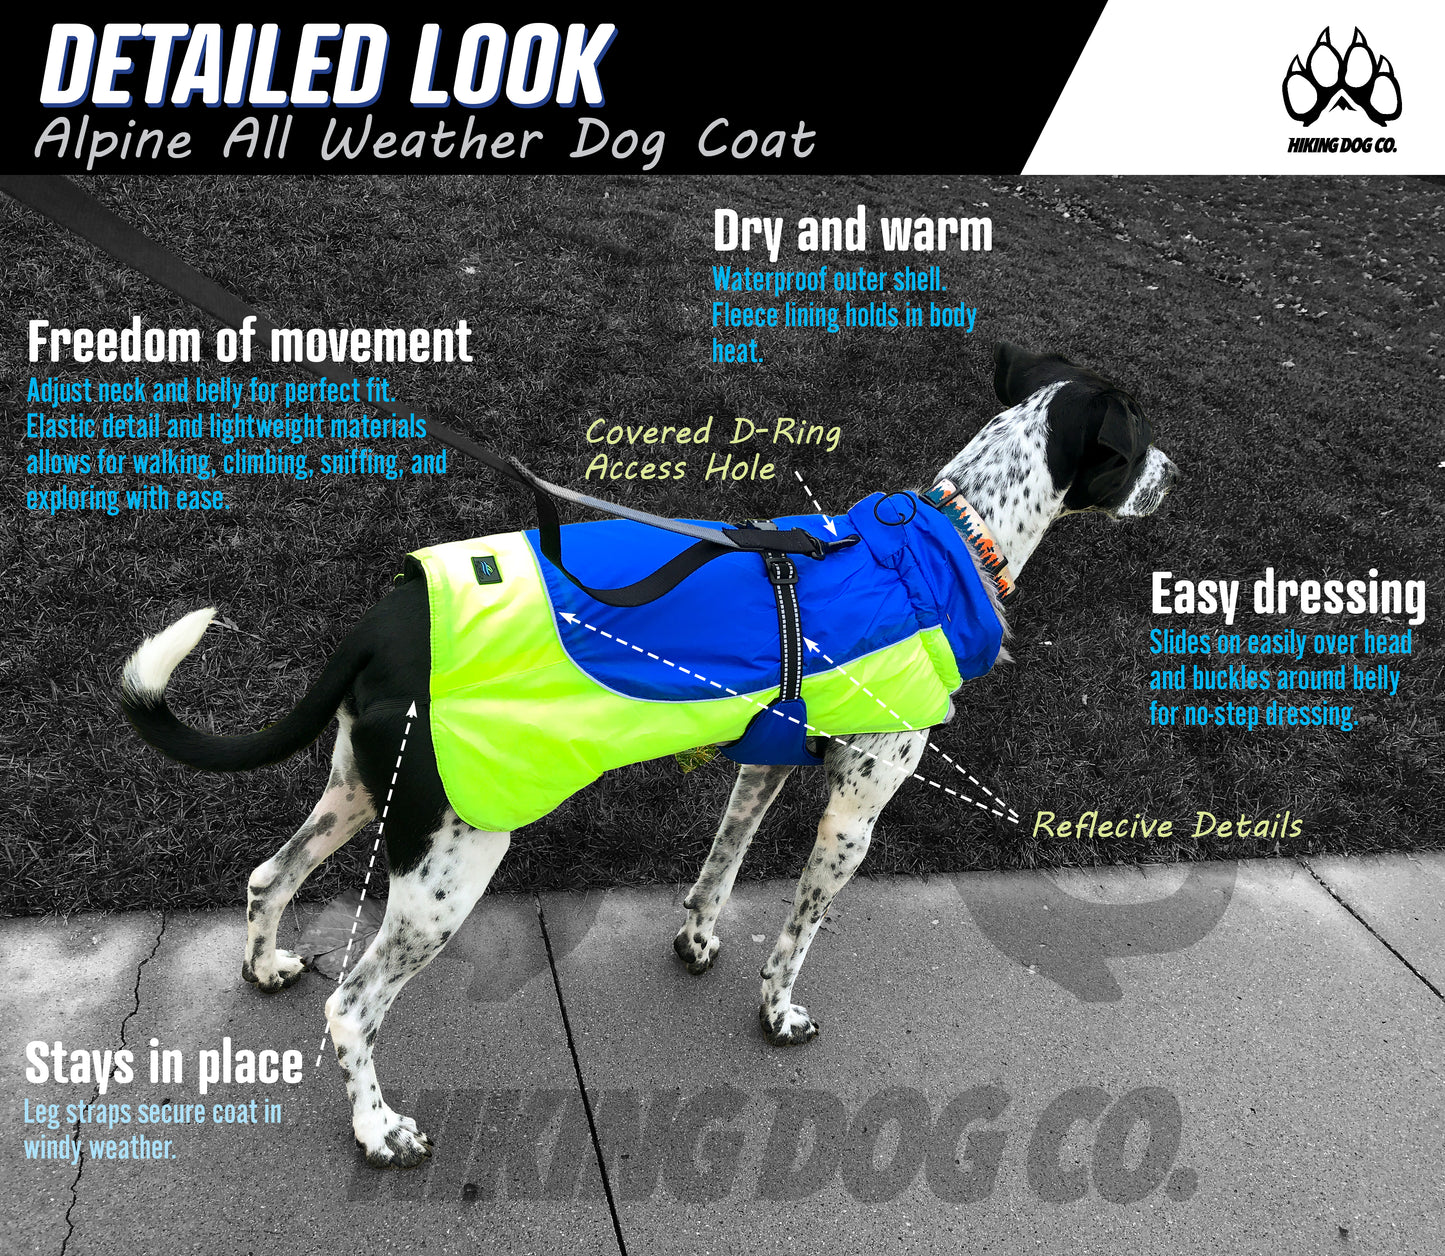 Detailed look at the Alpine All Weather Dog Coat. 